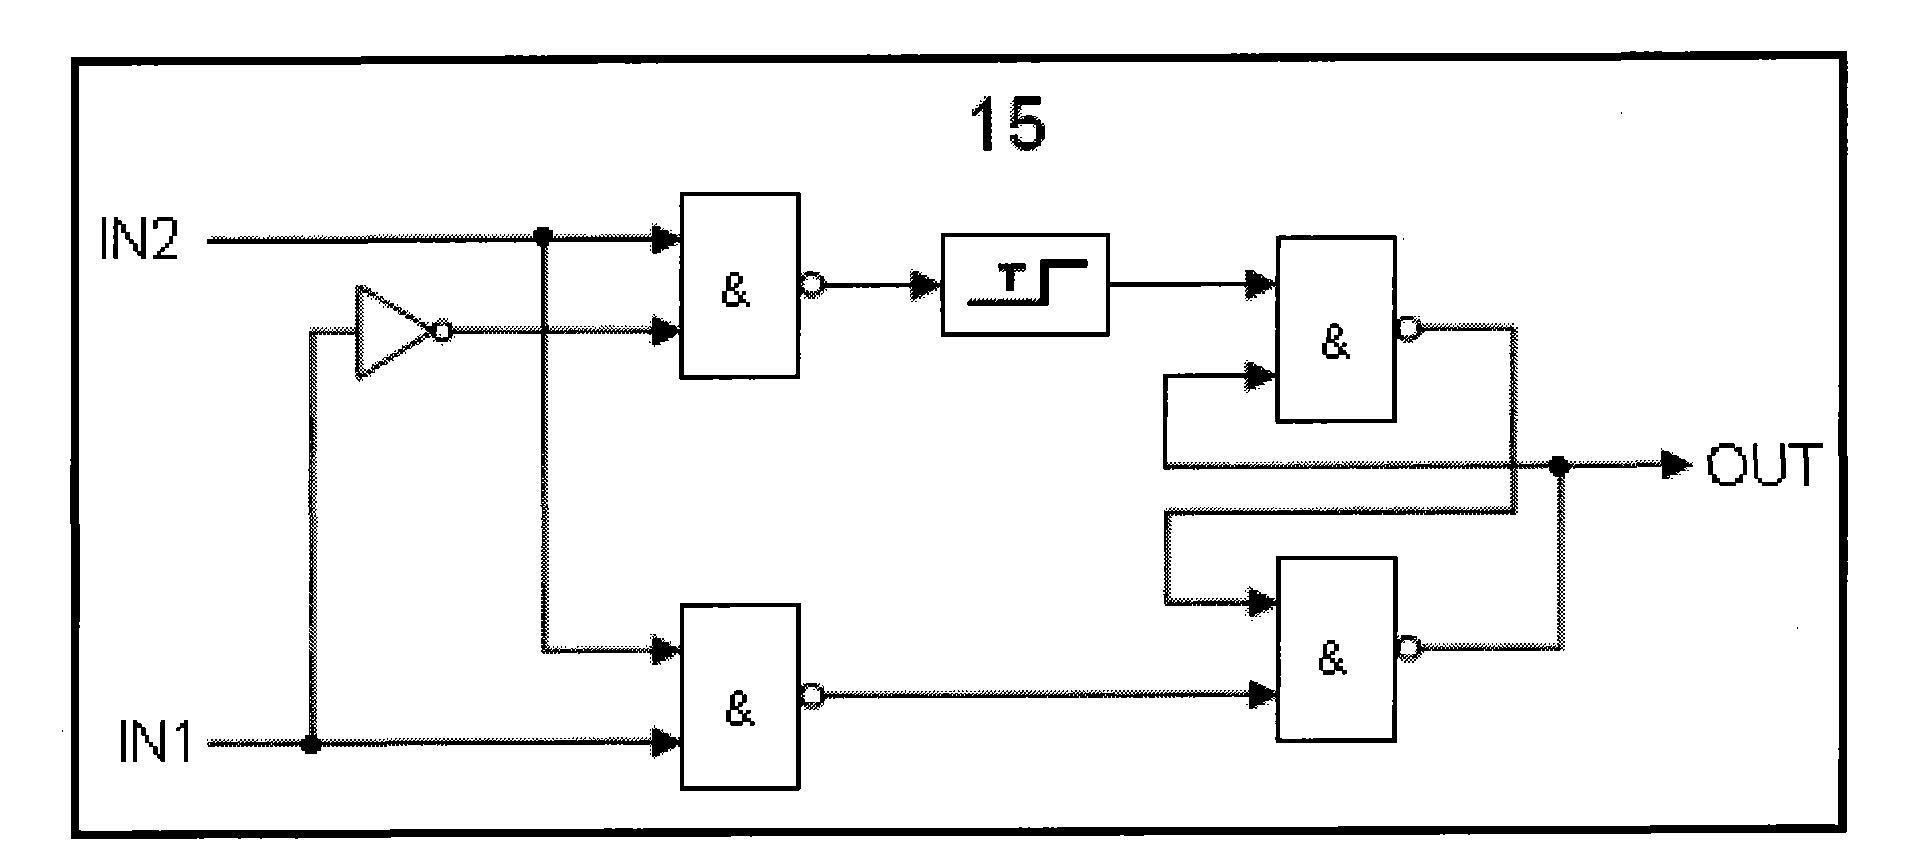 Starter relay control system and engine controller